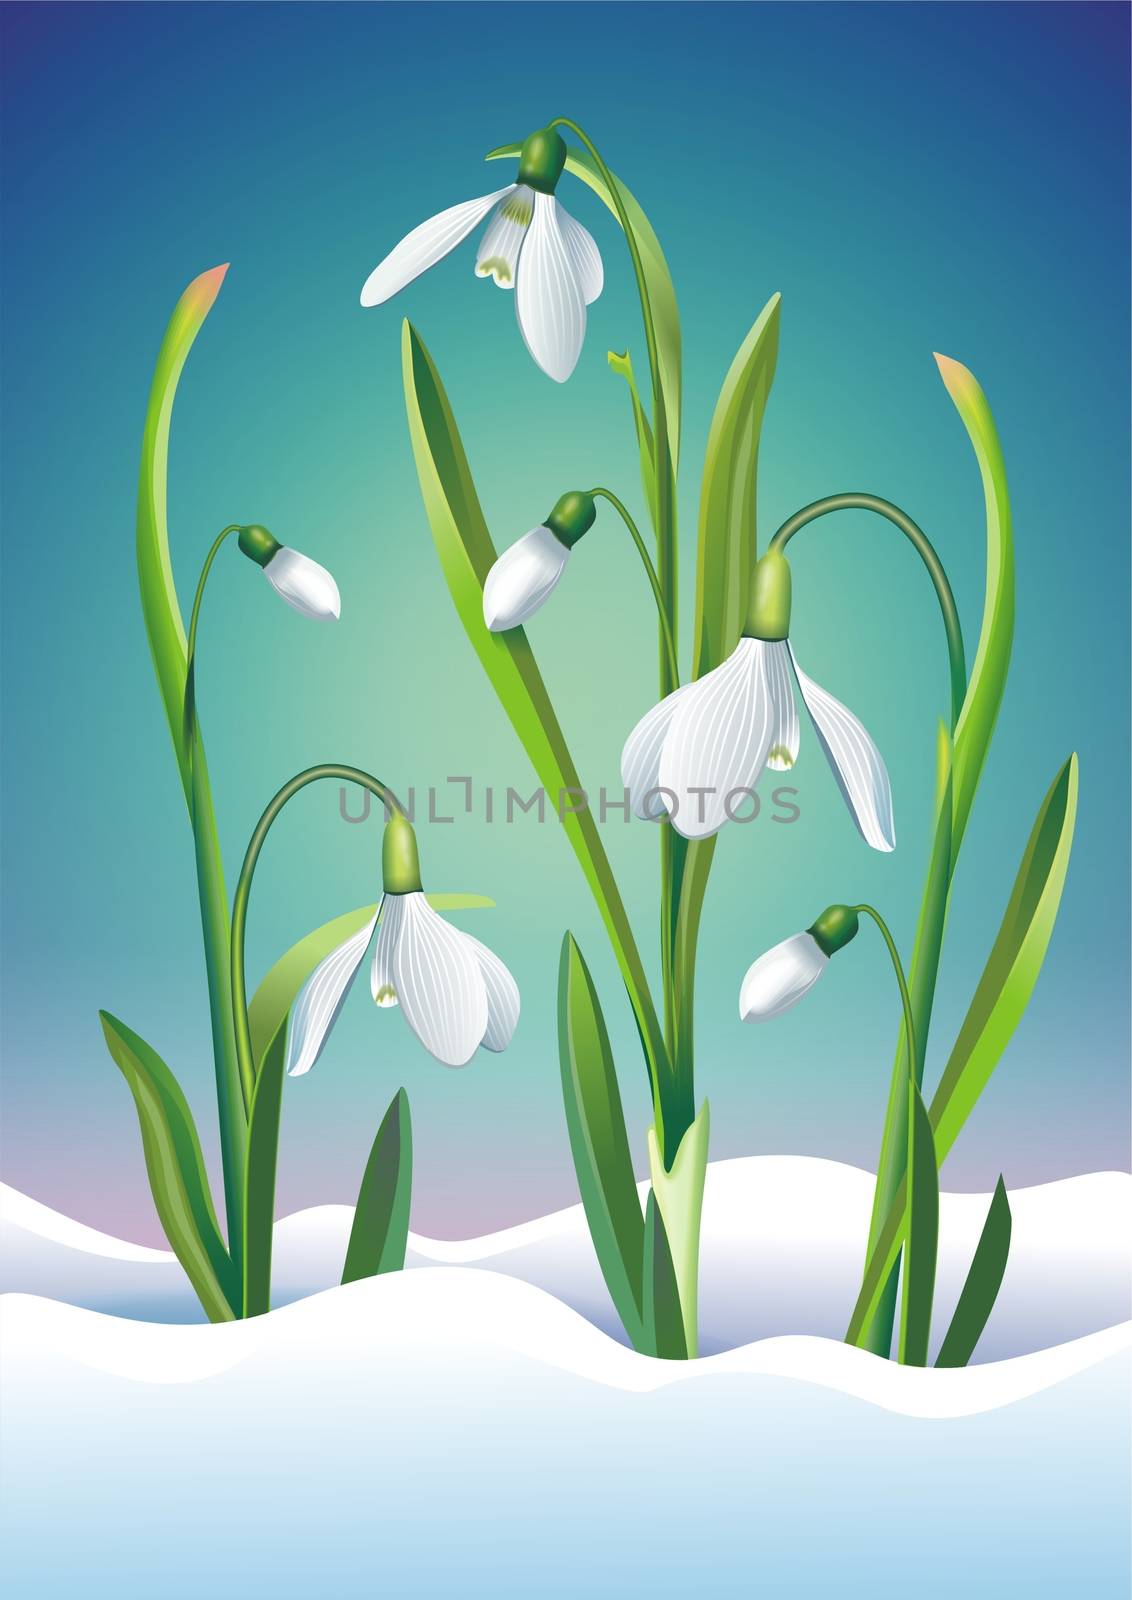 Snowdrop Flowers Illustration by welcomia